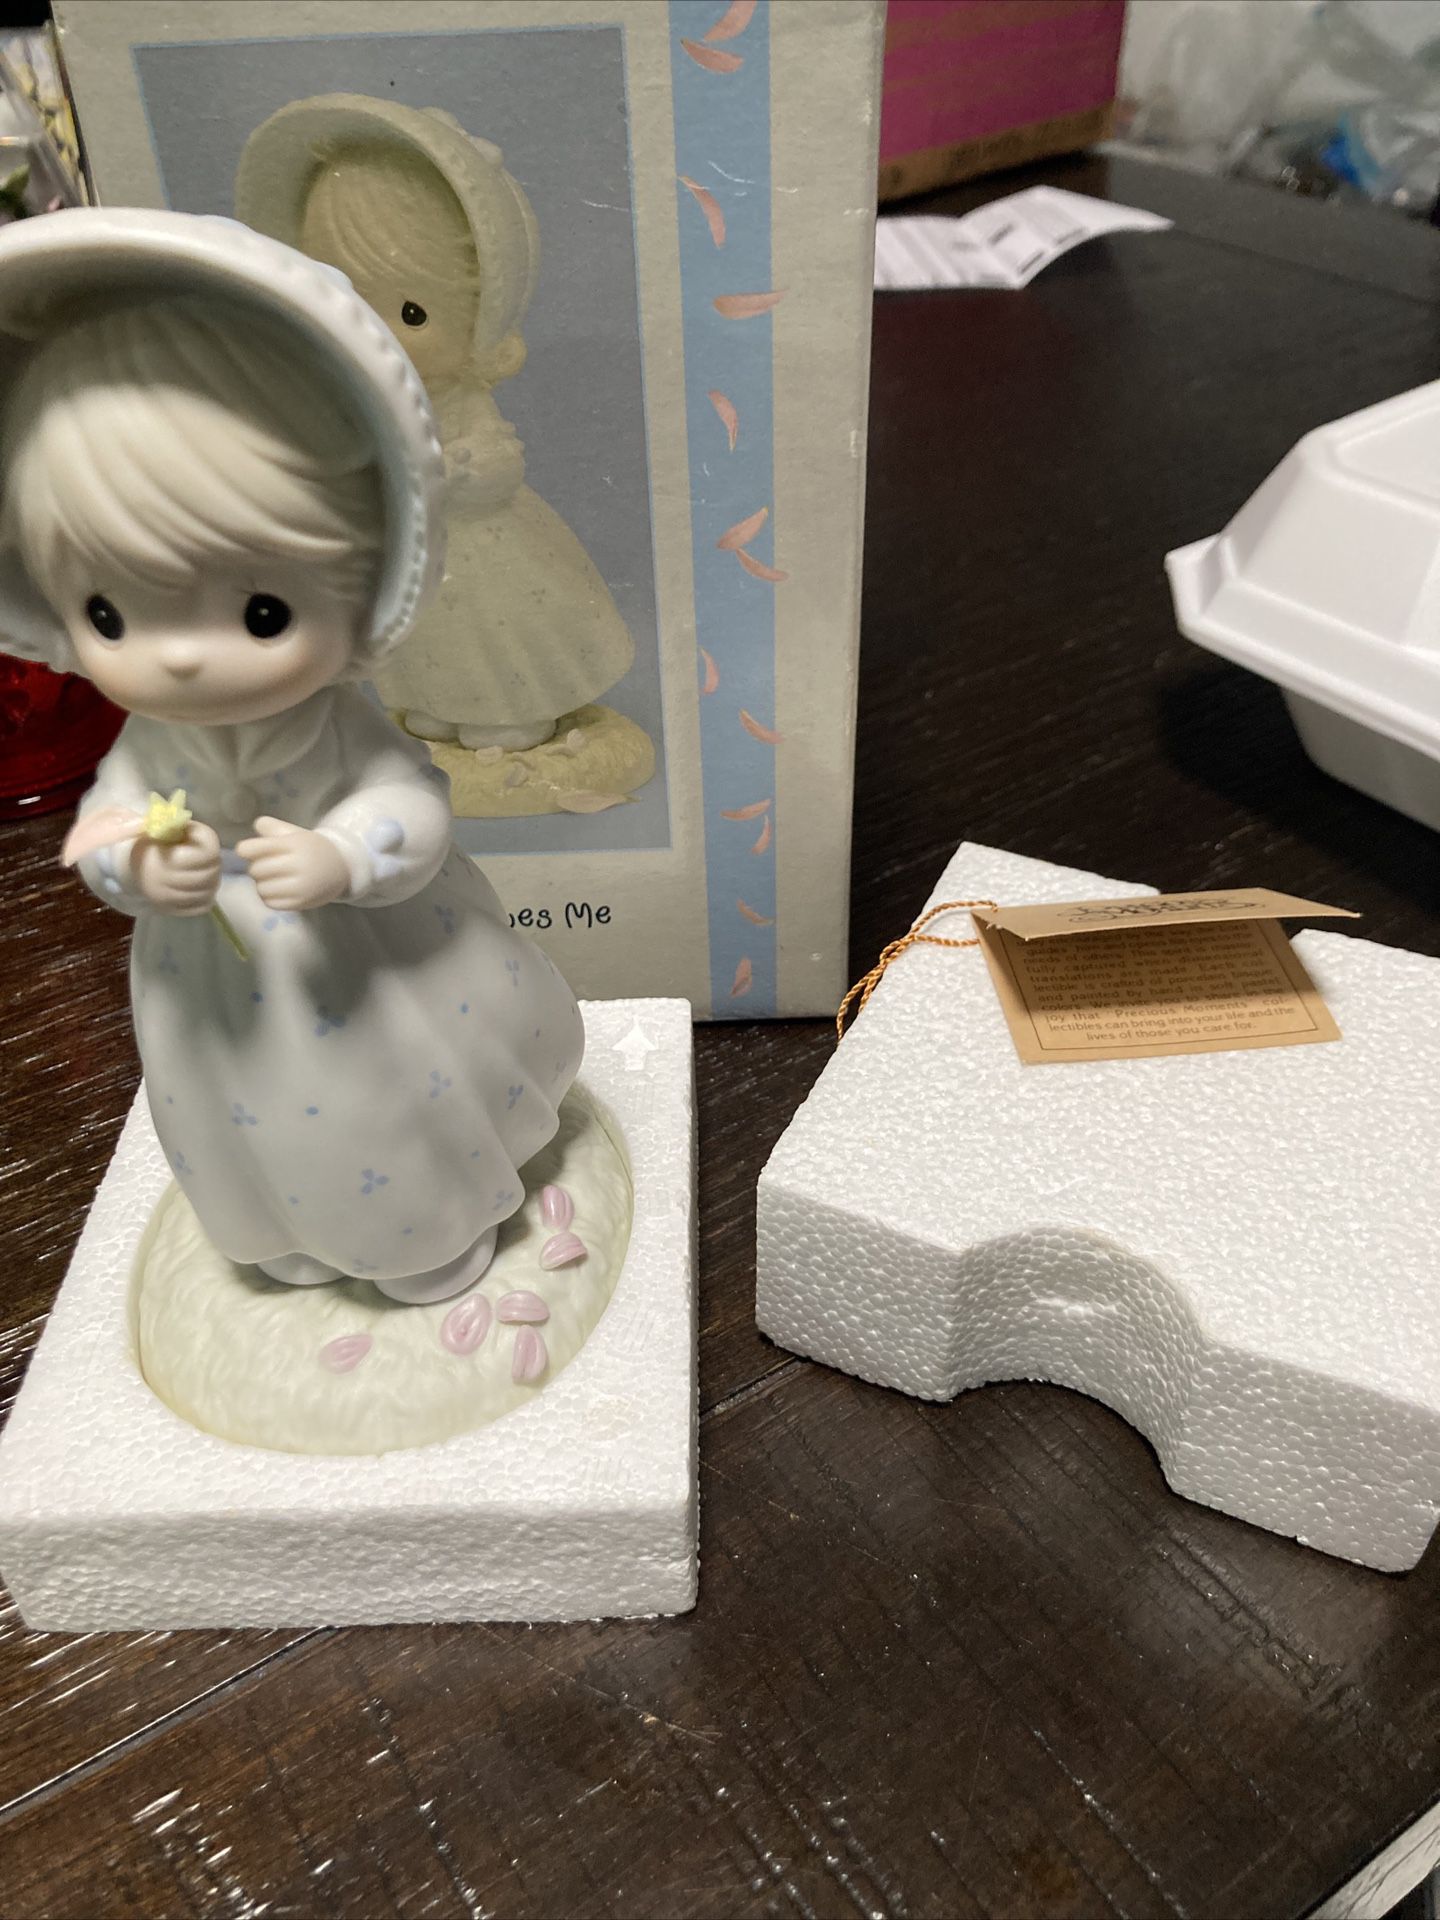 1) Precious Moments”He Loves Me “ With Box Limited Edition  2) Enesco Precious Moments Member's Only Figurine Dawn's Early Light PM-